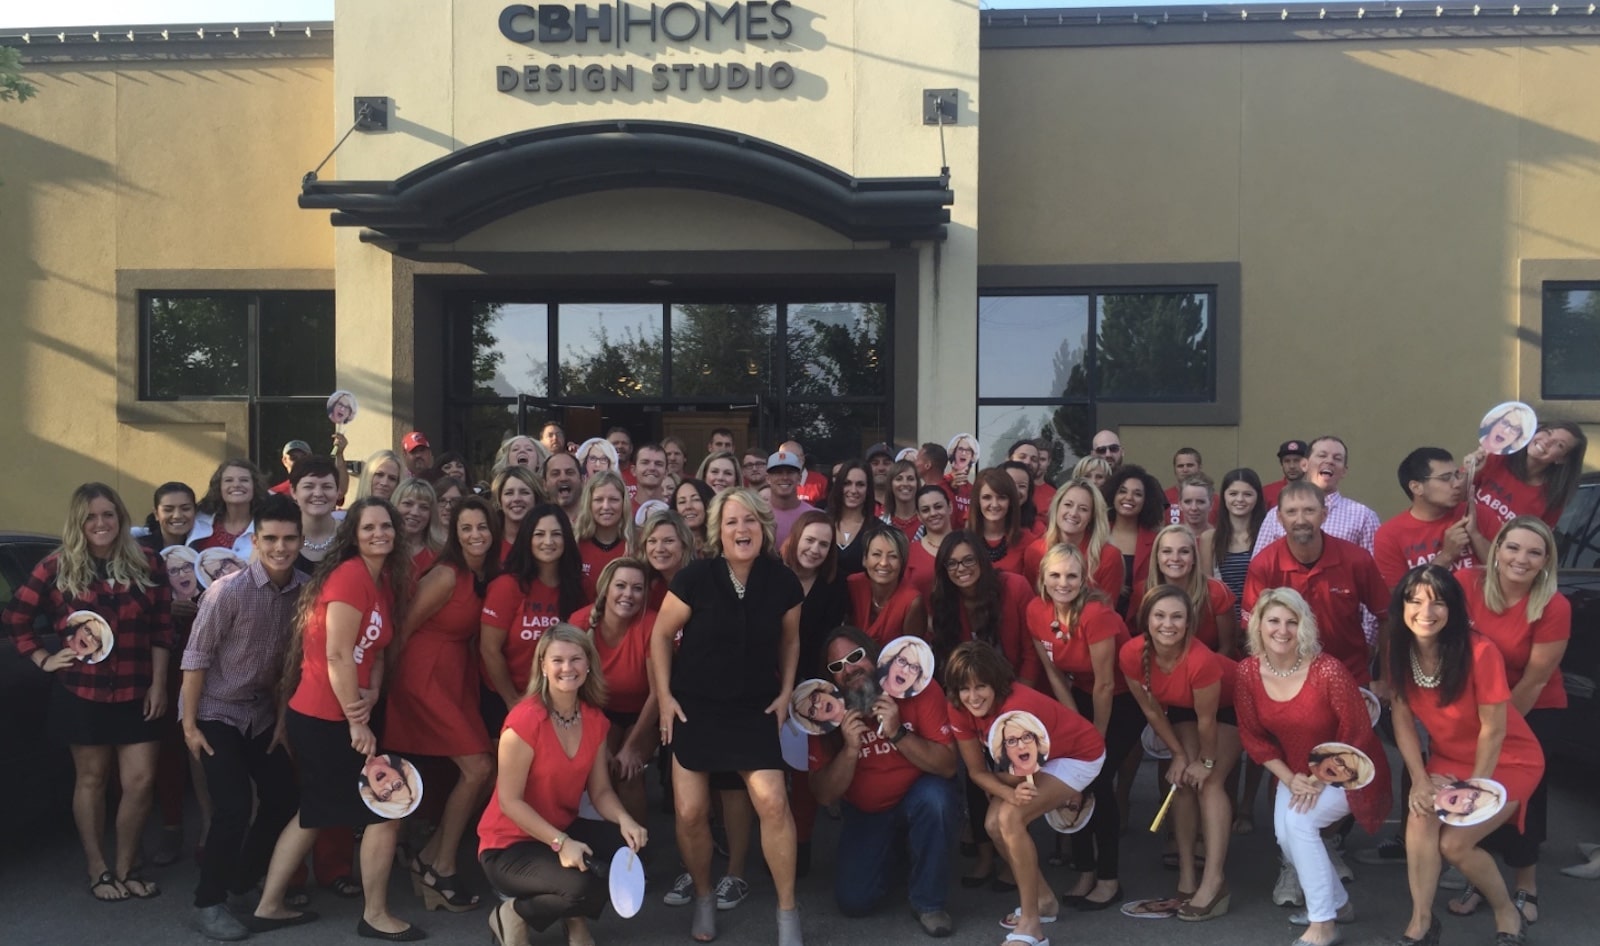 CBH Homes offers compelling workplace culture